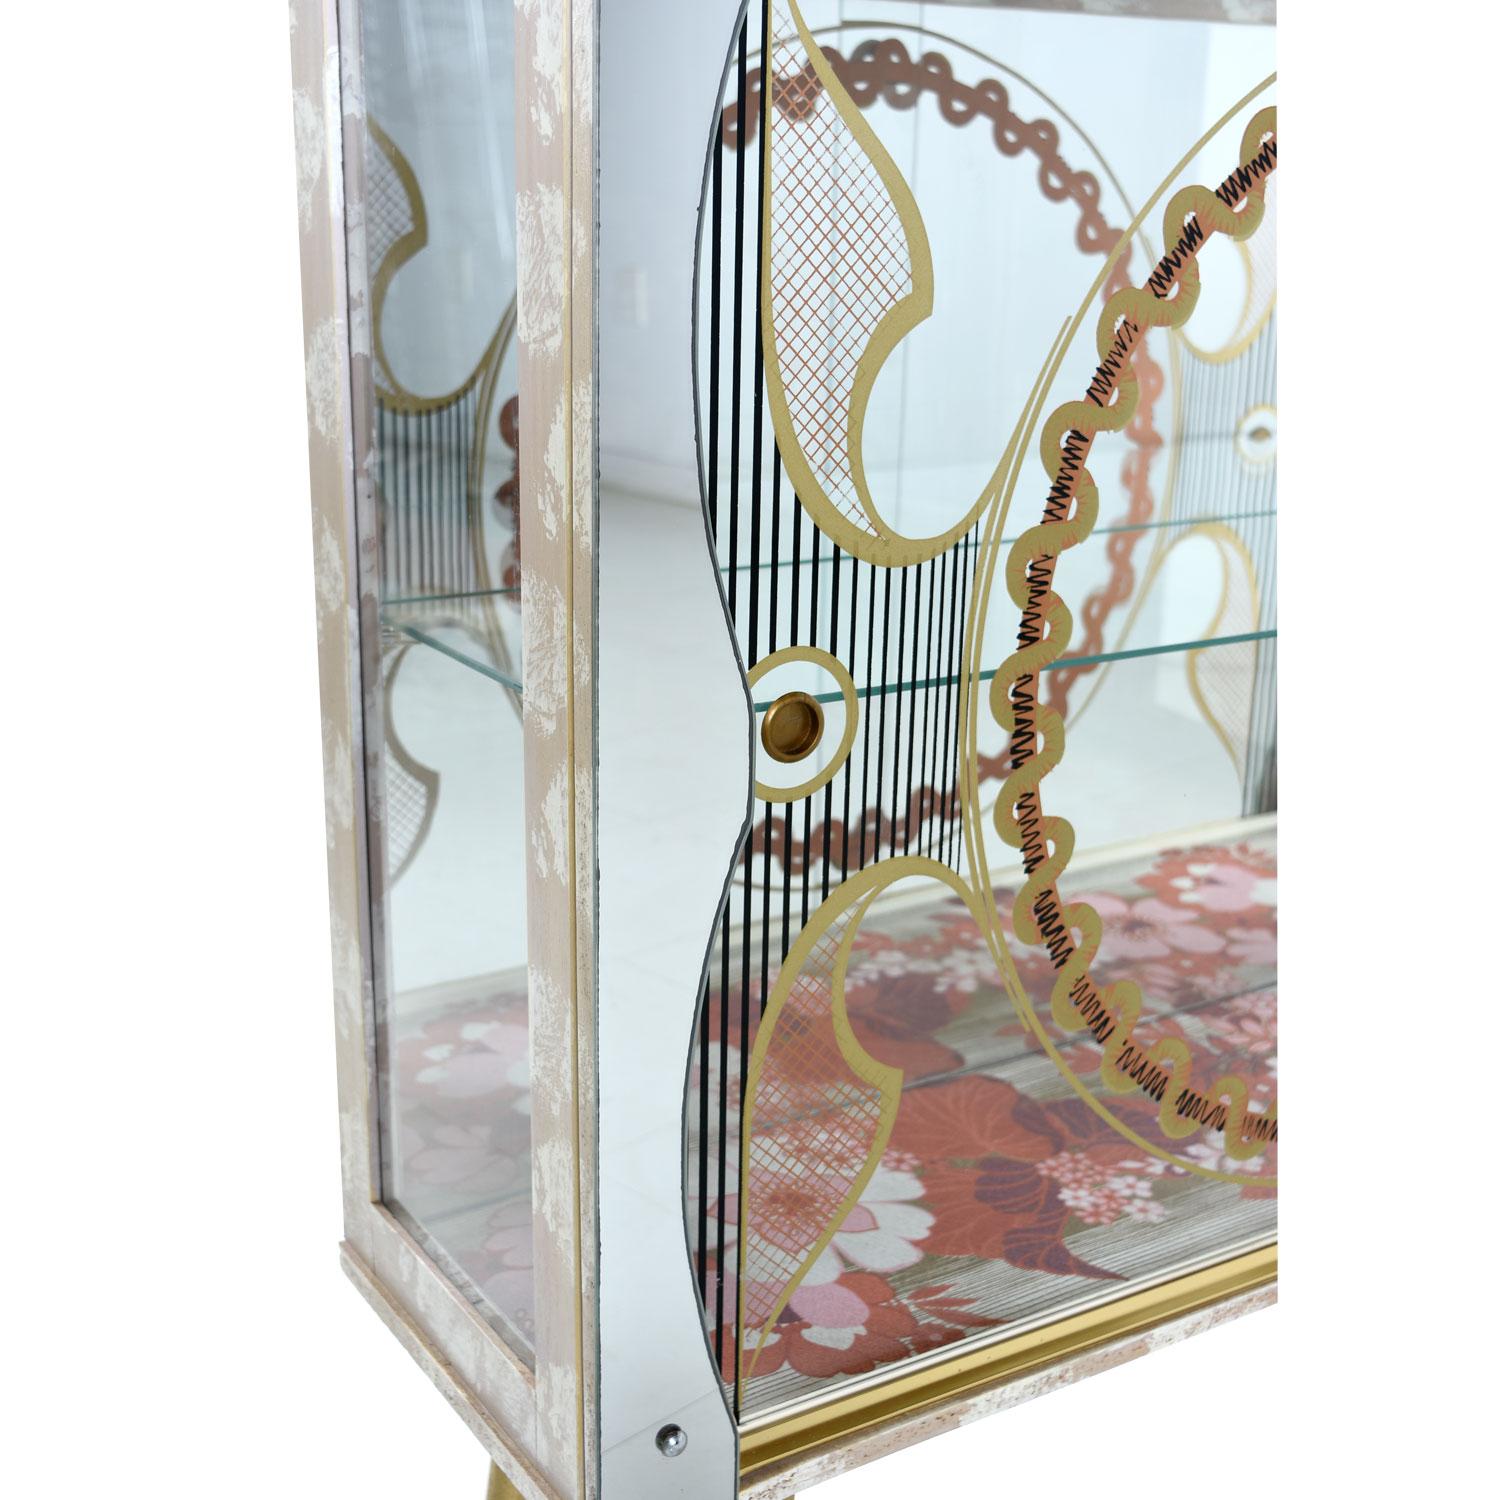 Hollywood Regency Painted Glass and Mirror Midcentury Deco Regency Glam Gold Accent Curio Cabinet